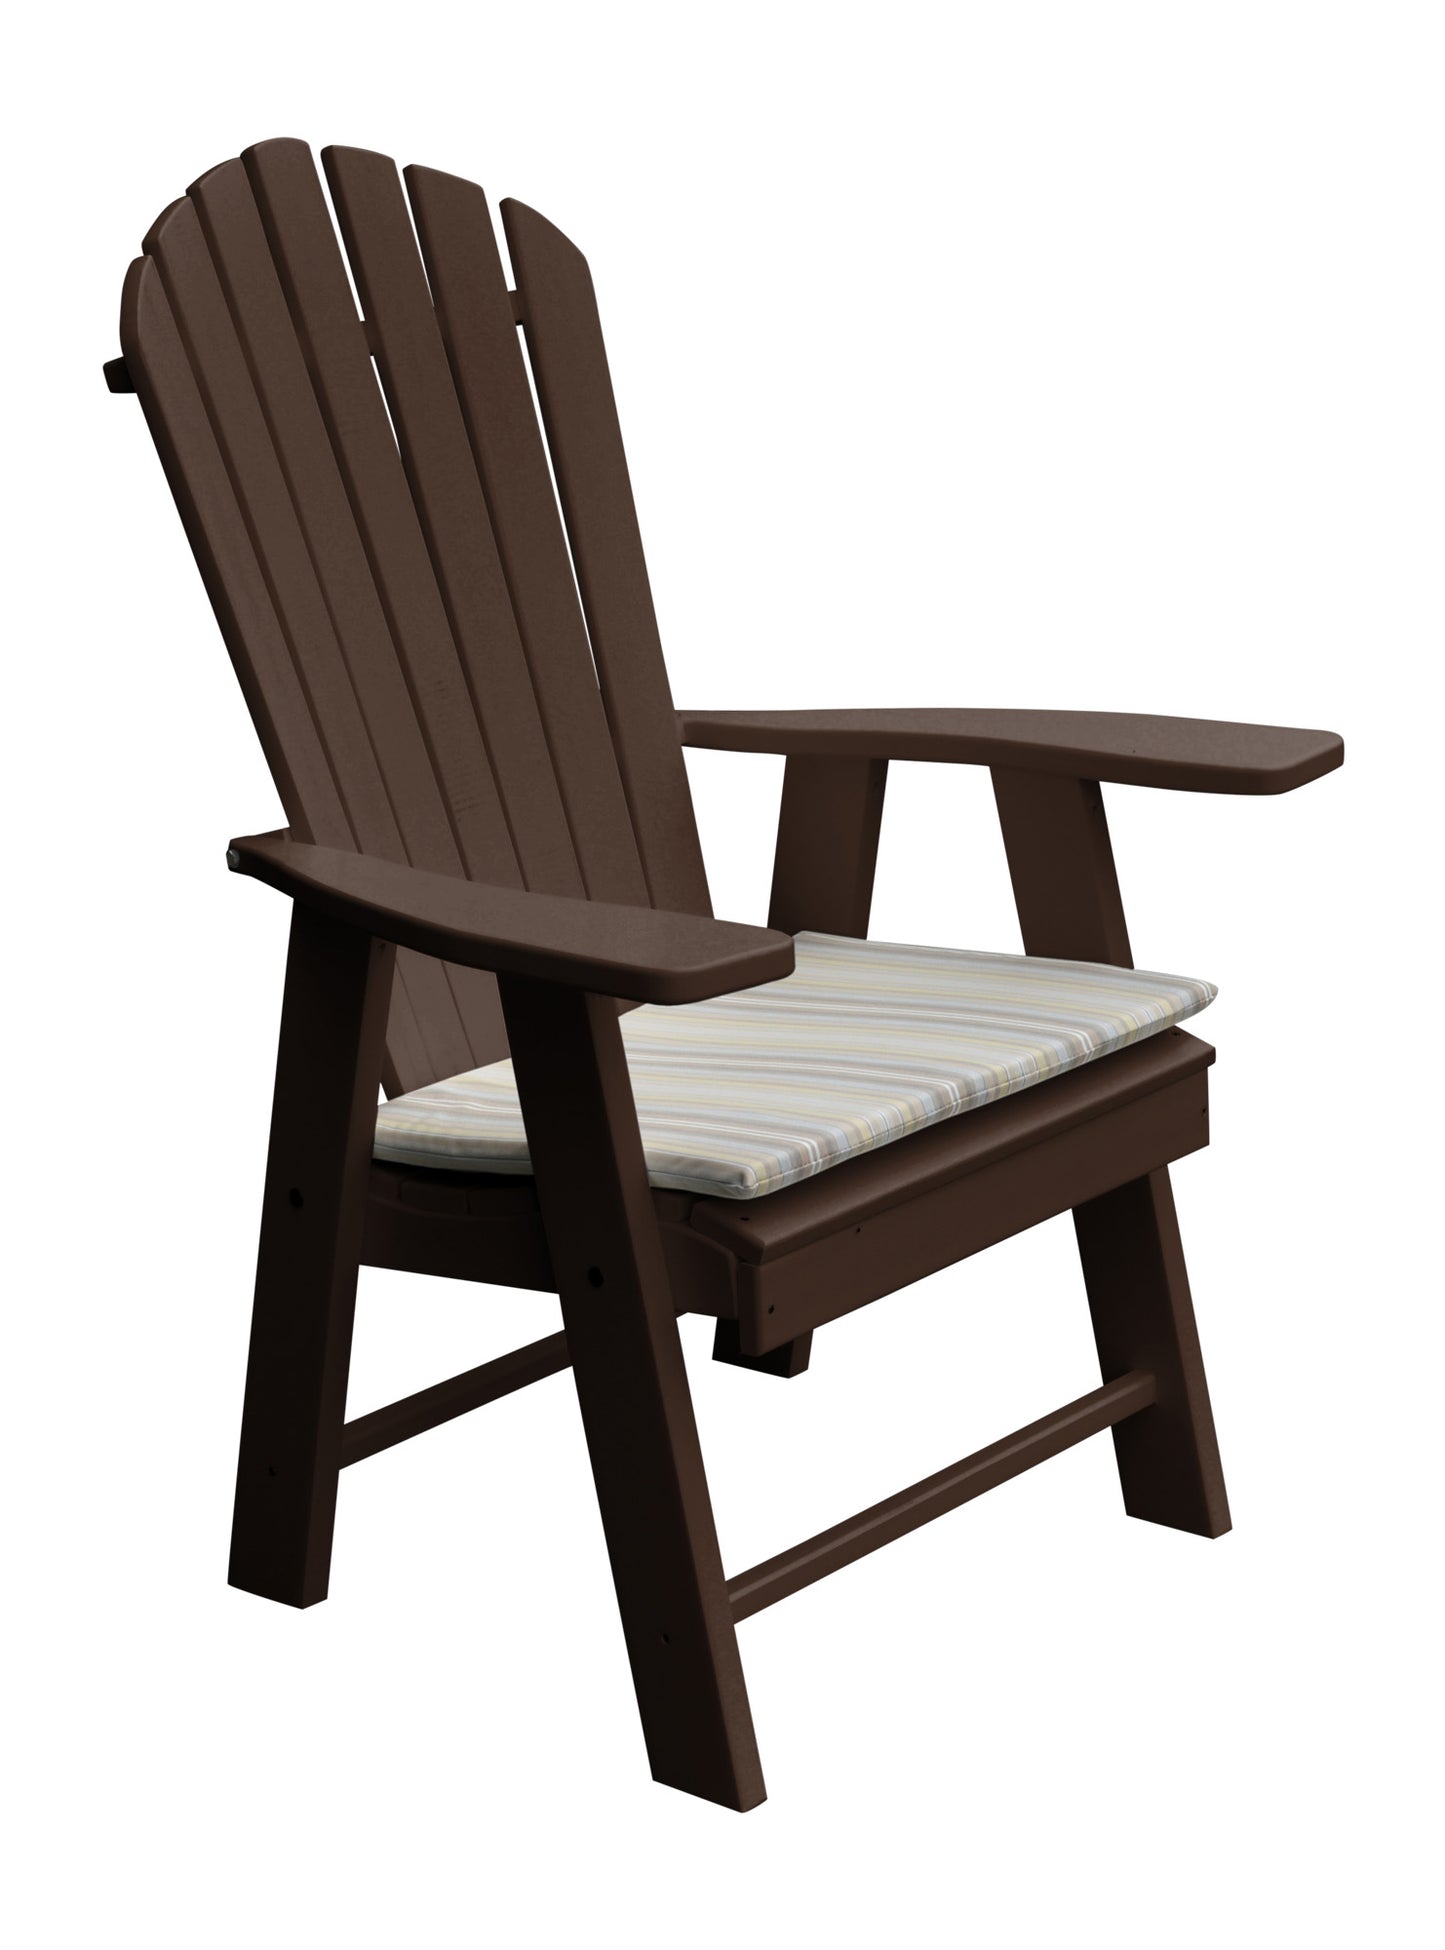 a&l recycled plastic upright adirondack chair tudor brown with seat cushion